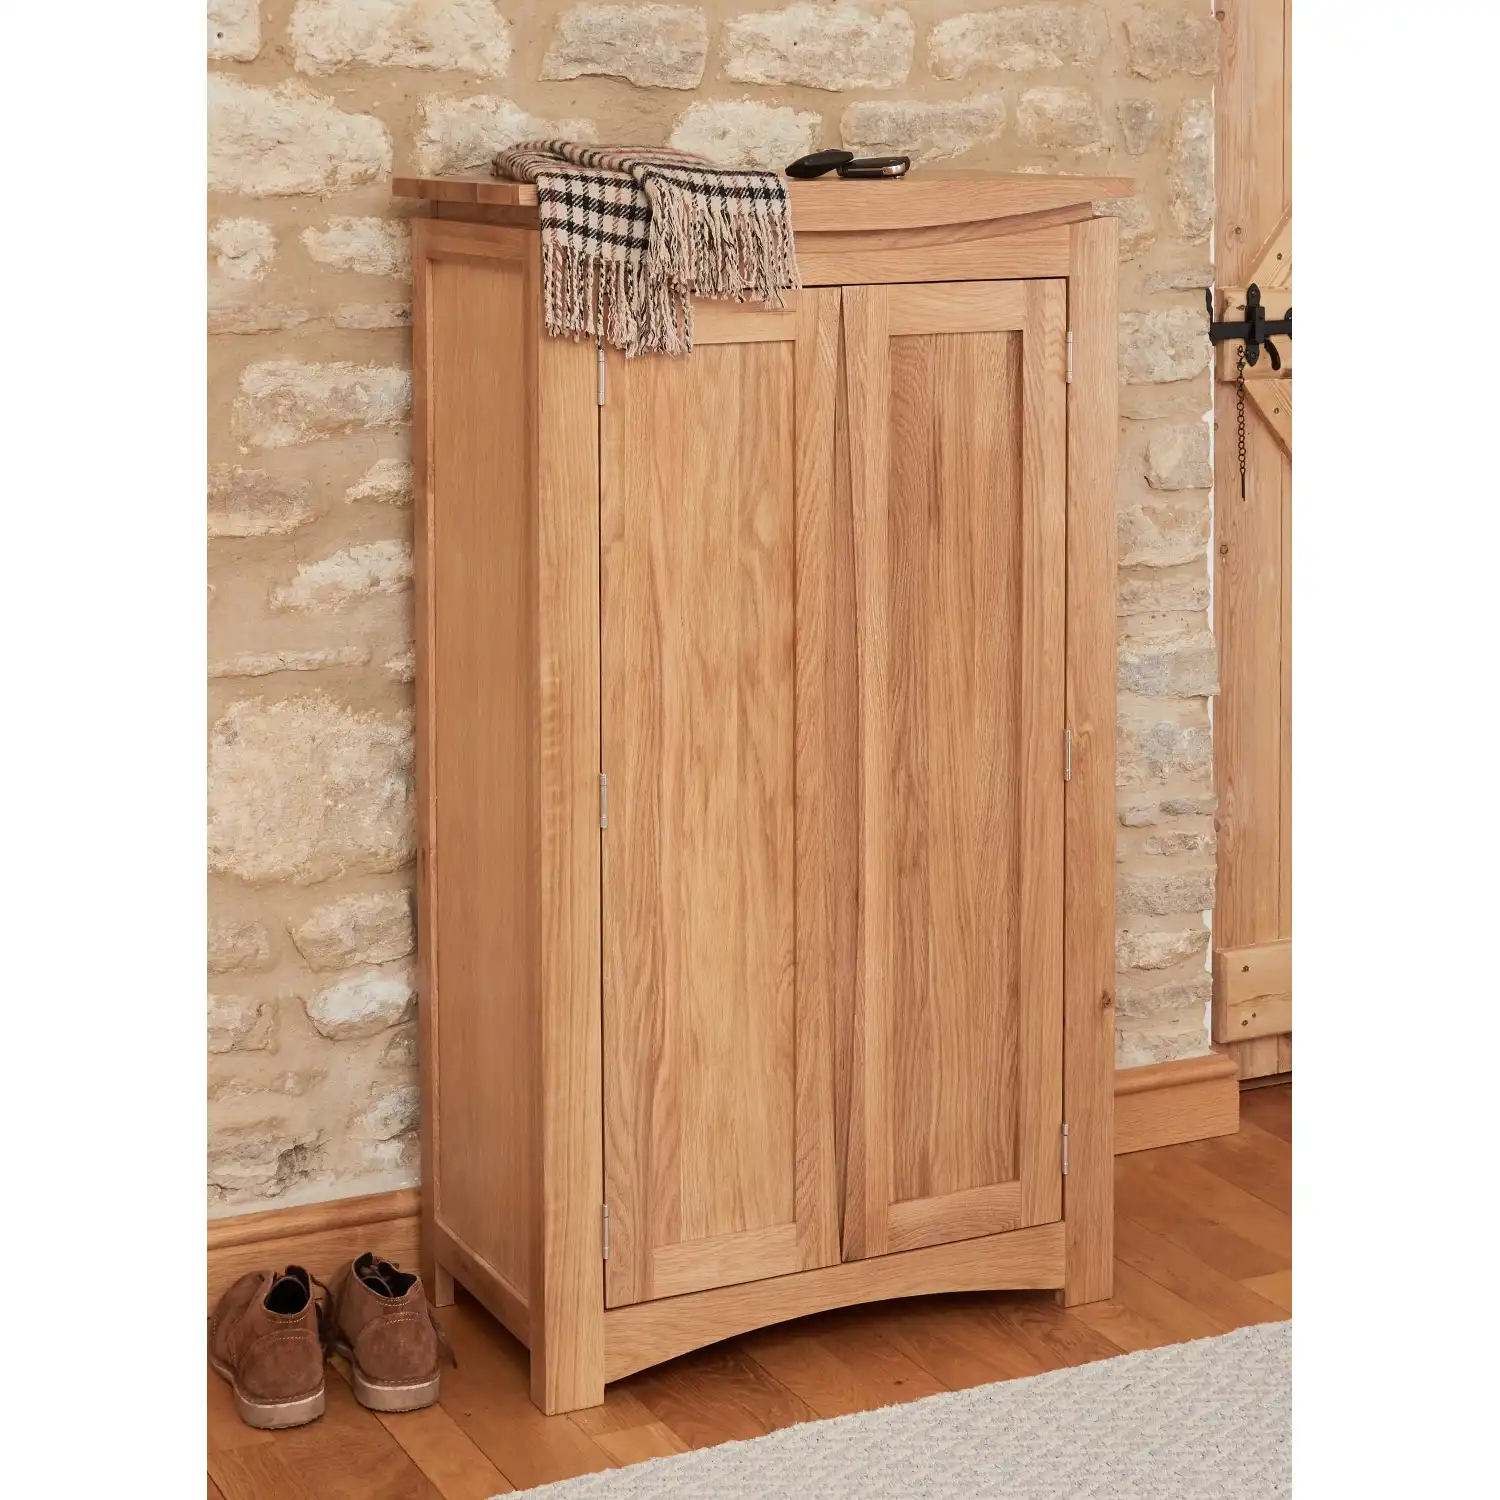 GFW Wooden Hallway Storage Organiser Cupboard Stores Up to 12 Shoes. Slim  Entryway Cabinets for Home, Oak, Grey, H108.5cm x W80cm x D25cm : Amazon.co. uk: Home & Kitchen